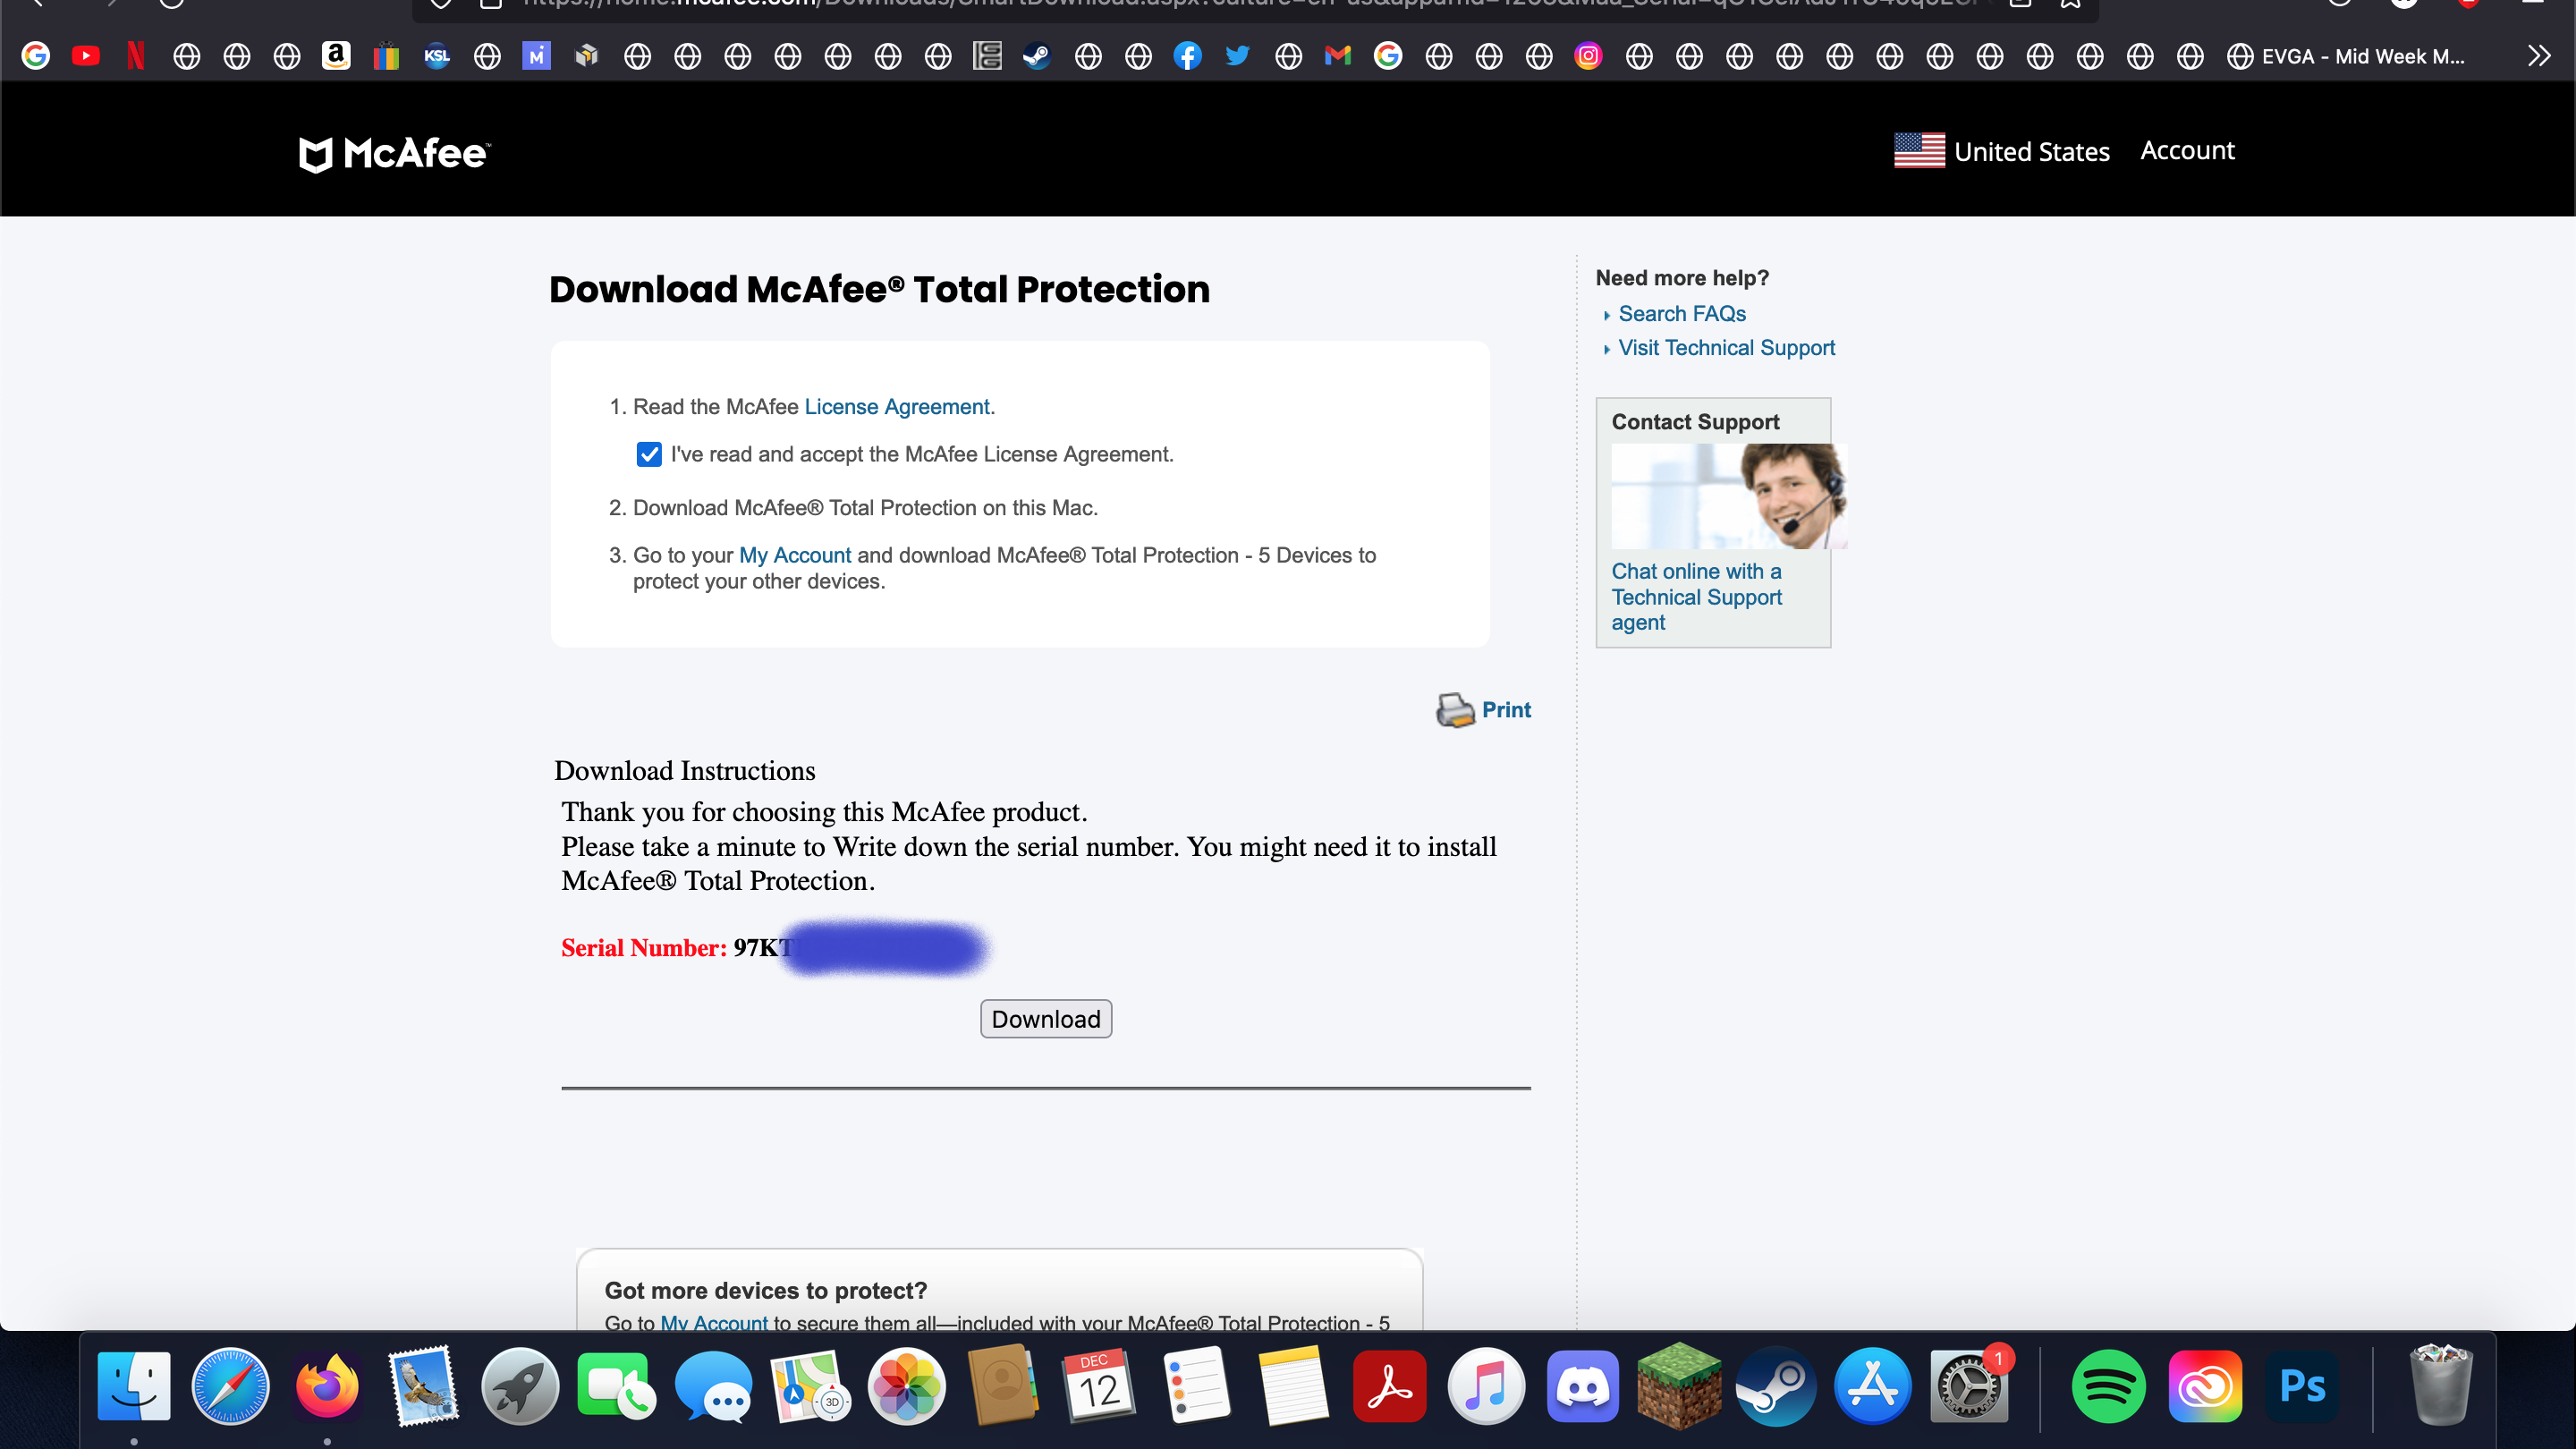 McAfee license agreement and serial number